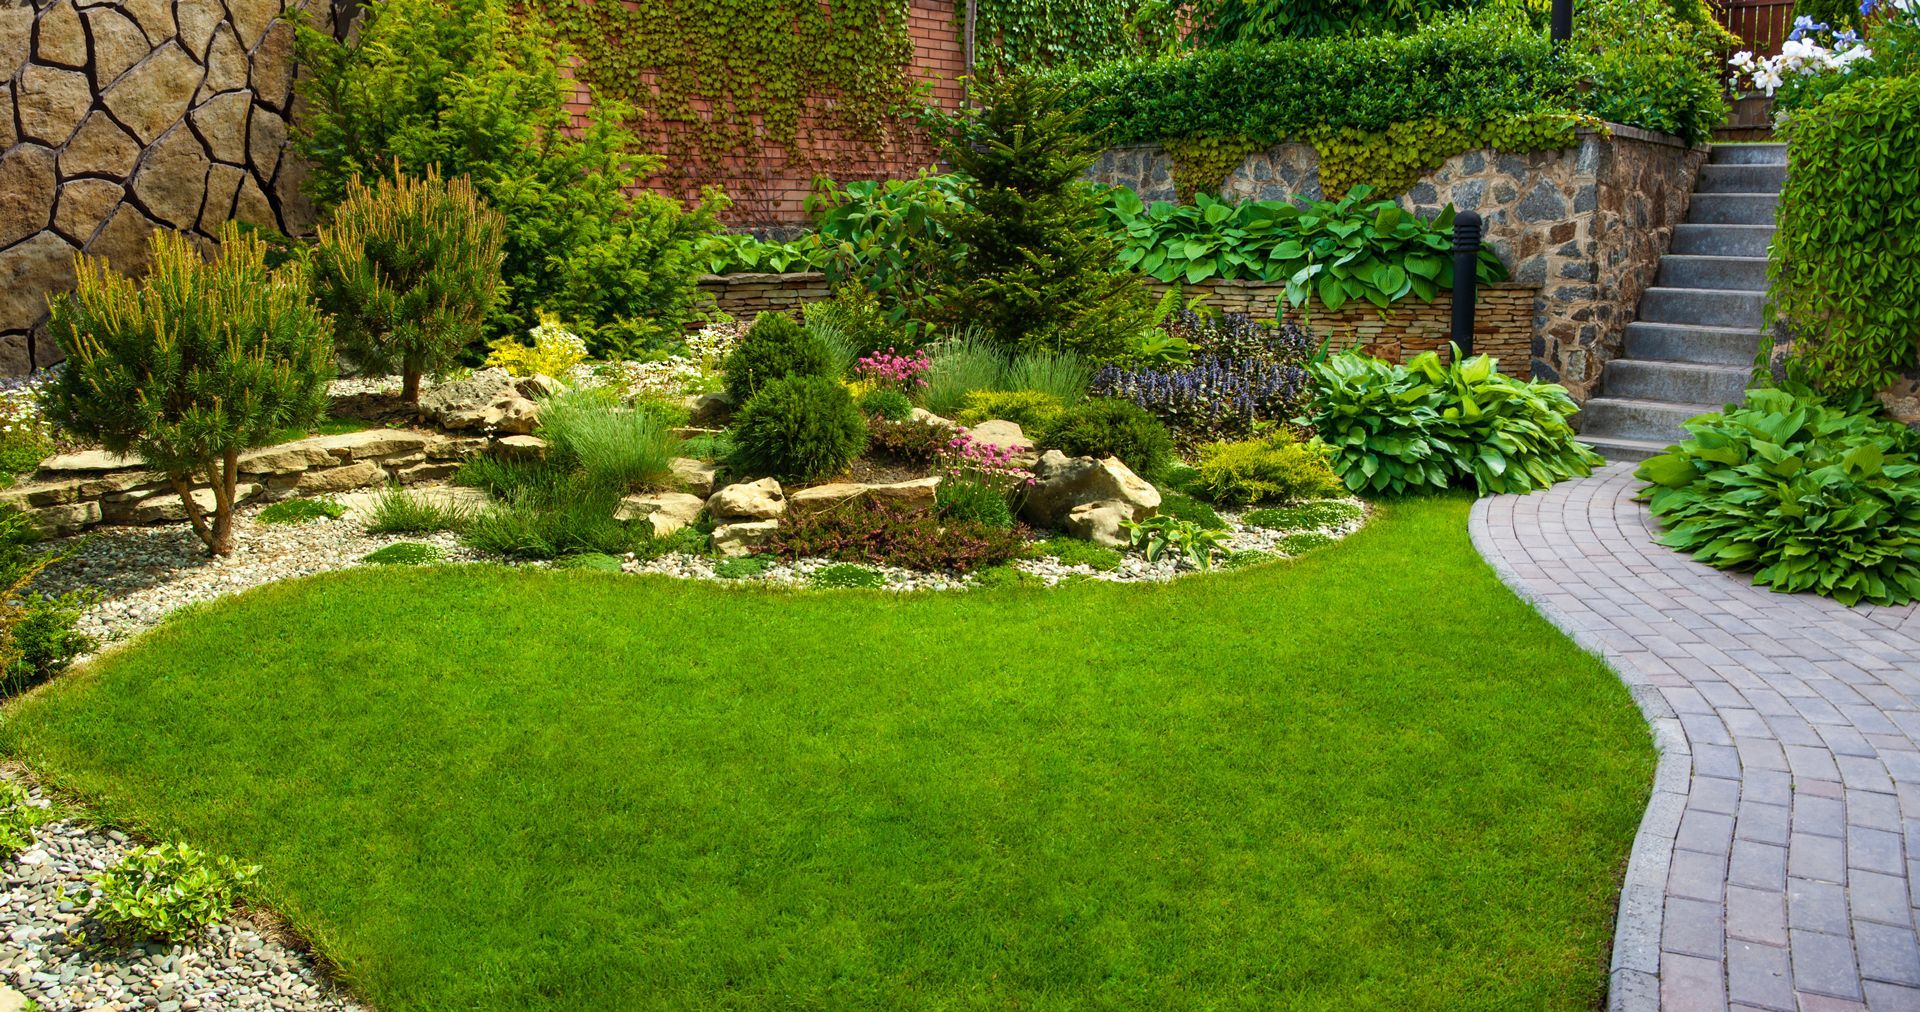 a lush green garden with a brick walkway leading to a stone wall and stairs